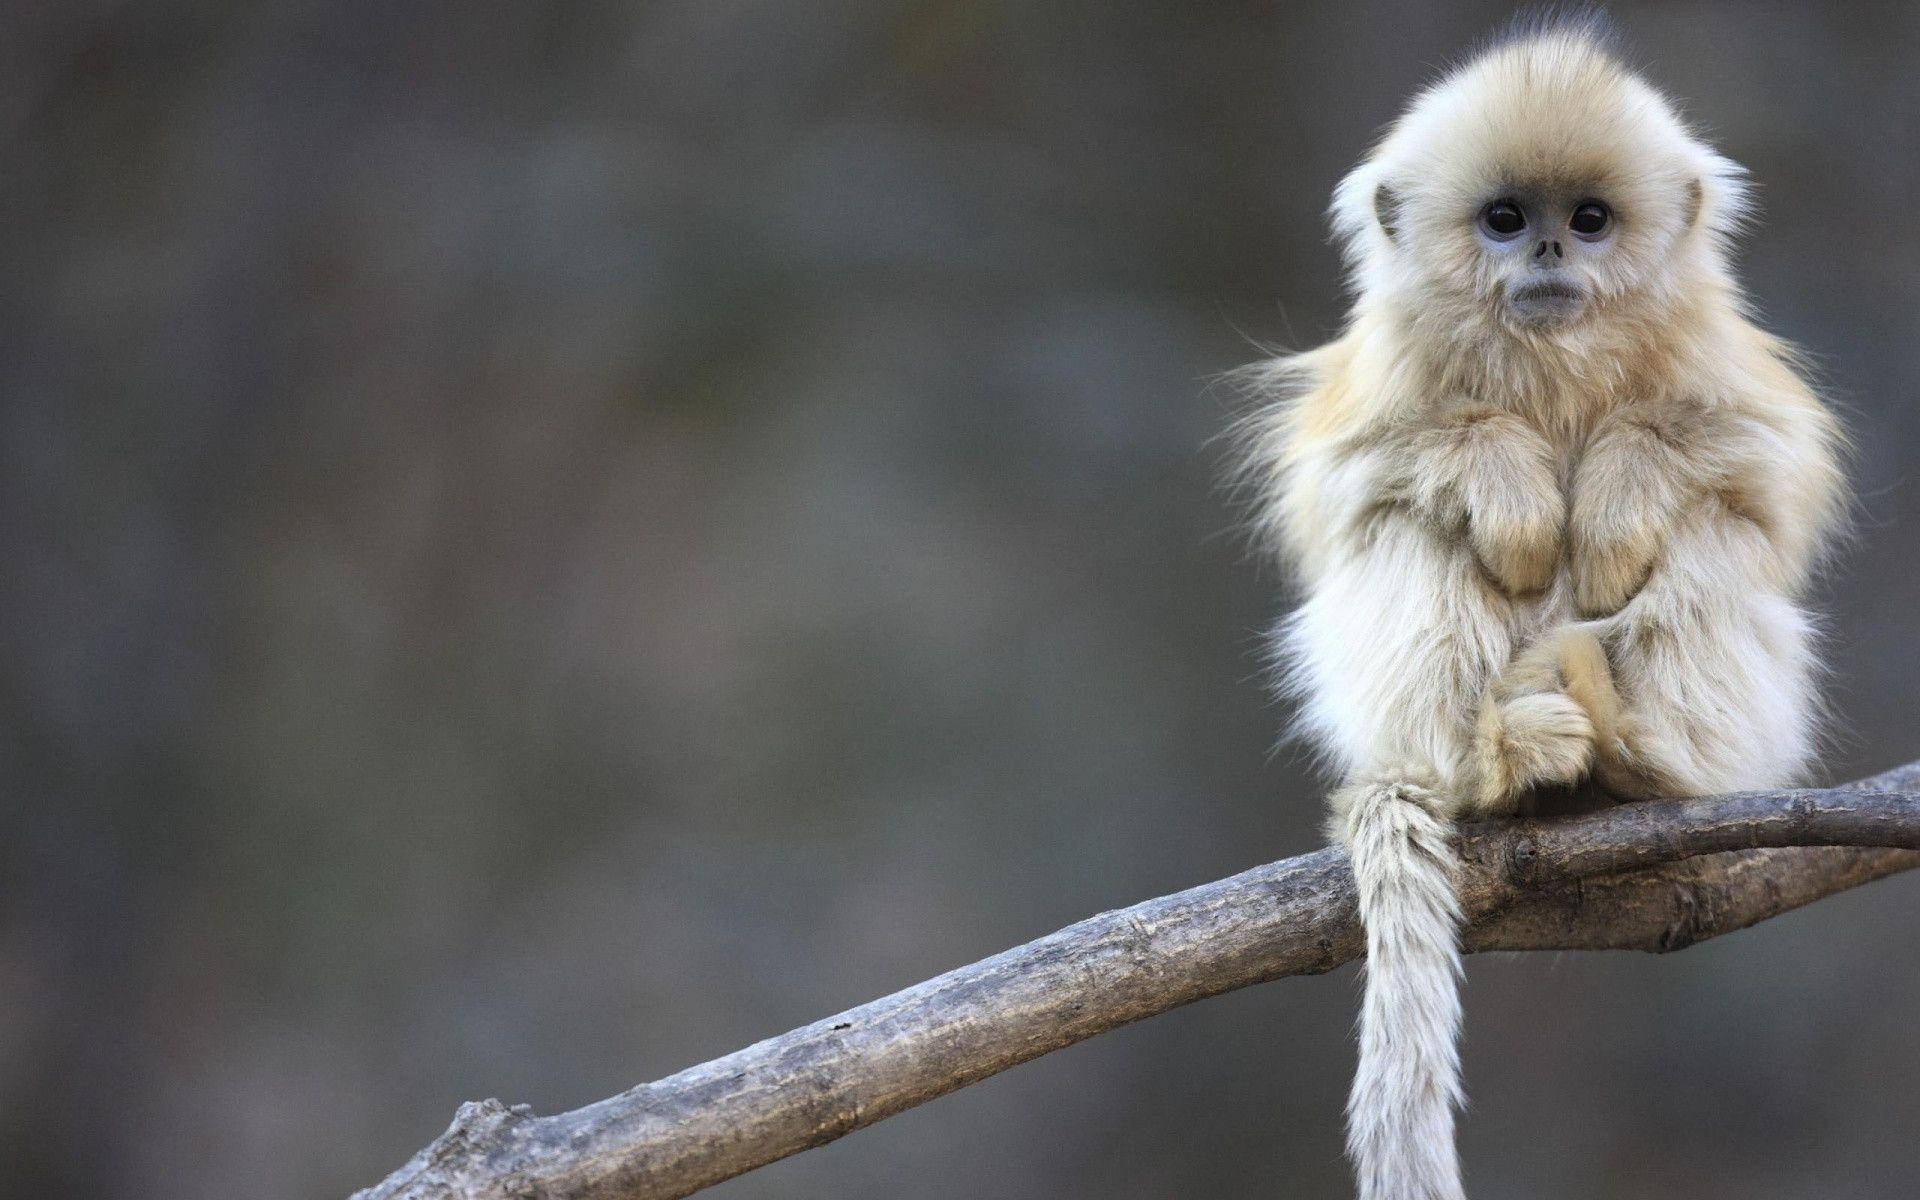 Cute Monkey With Cotton-like Hair